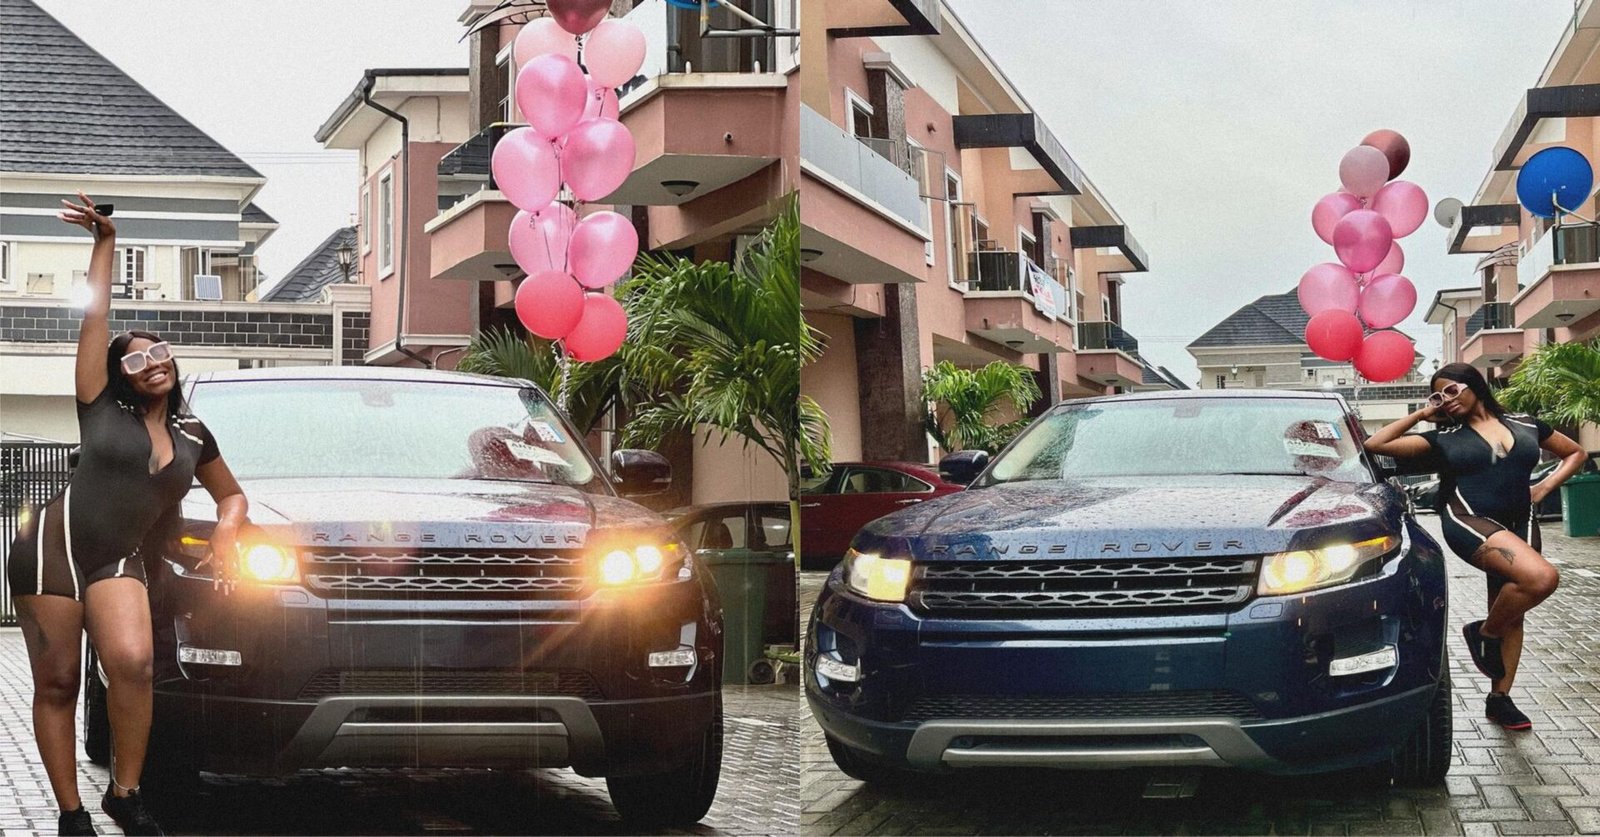 “Real hot girl” – Angel writes as she shows off her newly acquired Range Rover SUV